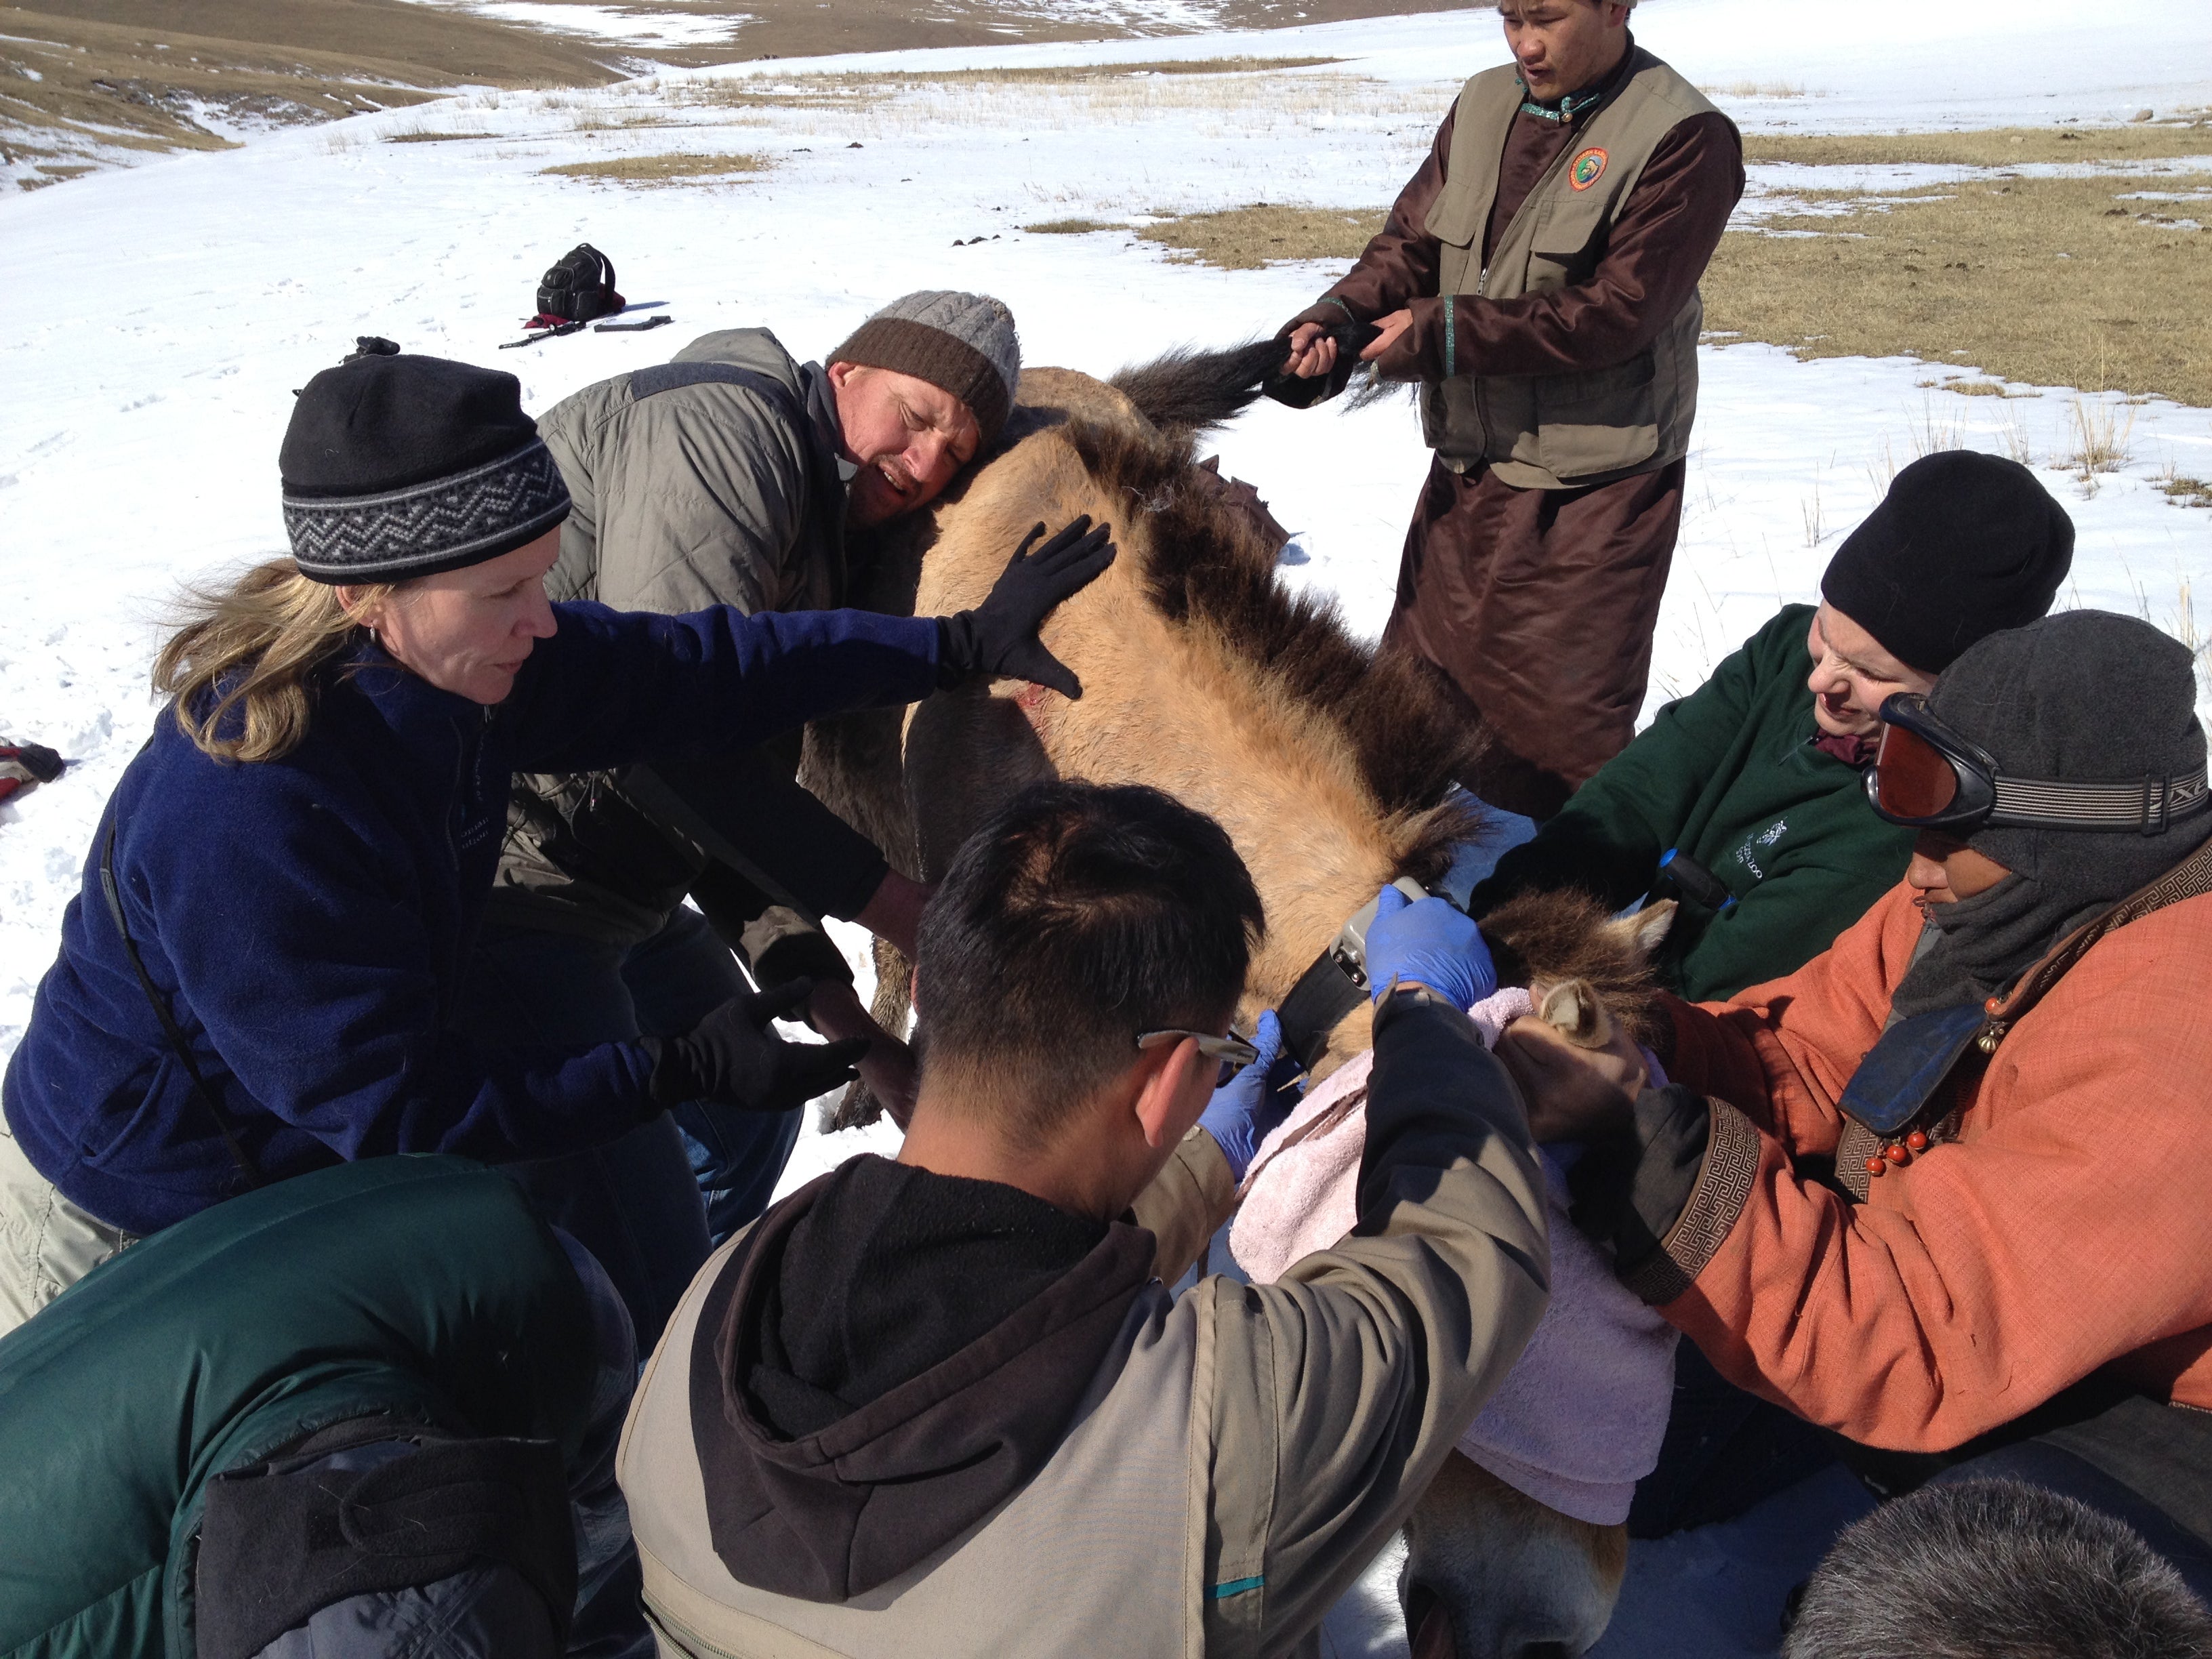 A photo of a group of scientists and park staff collaring a wild Przewalski's horse in Hustai National Park in Mongolia. Mel Songer is on the lefthand side of the image.